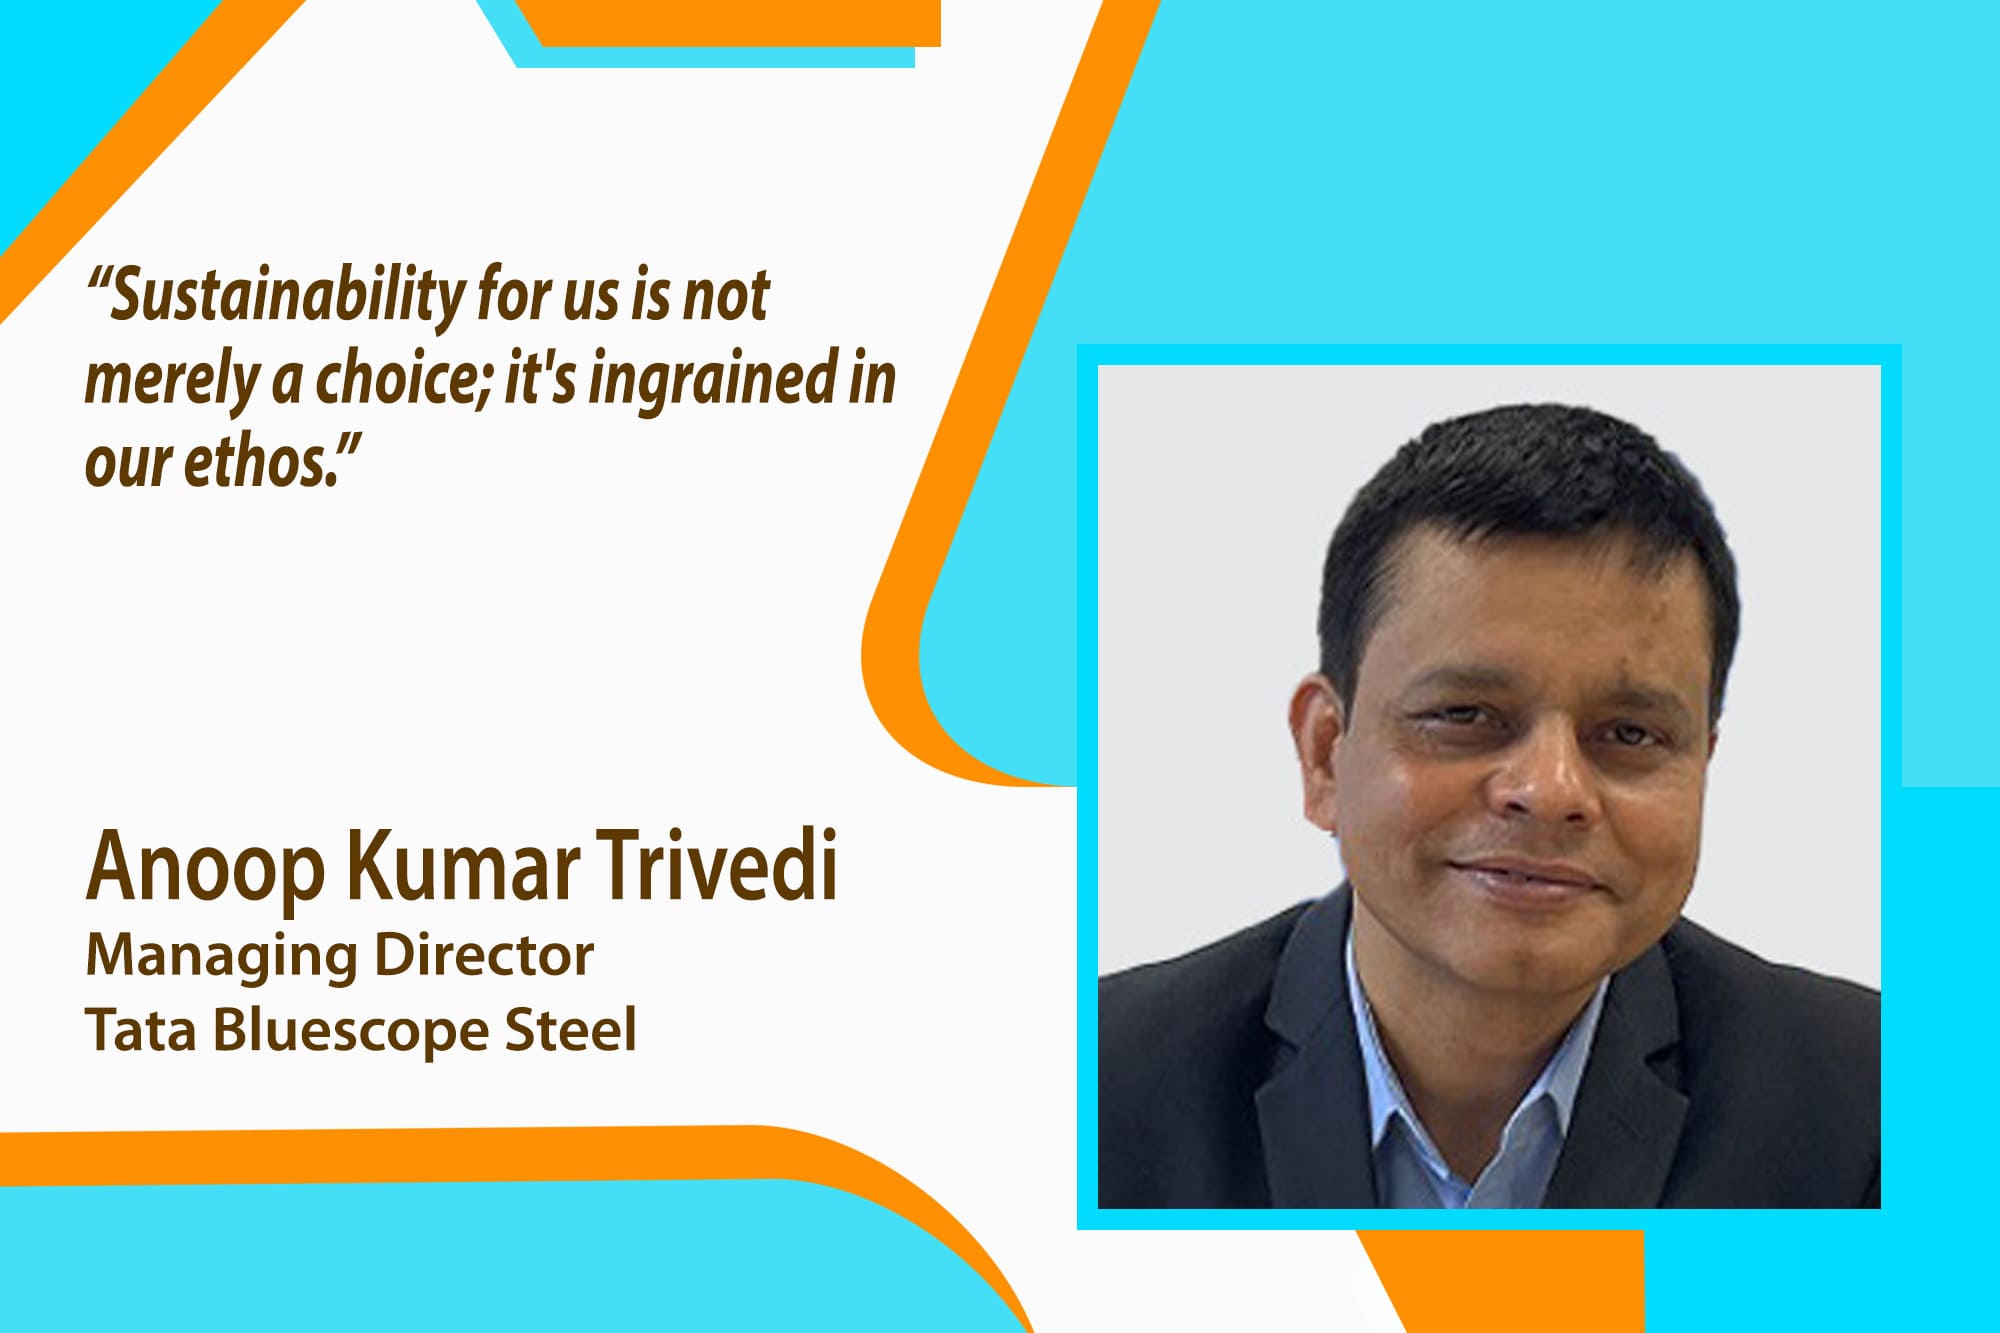 Anoop Kumar Trivedi, Managing Director at Tata Bluescope Steel, to delve into the core philosophy, market strategies, and upcoming projects that define their journey.